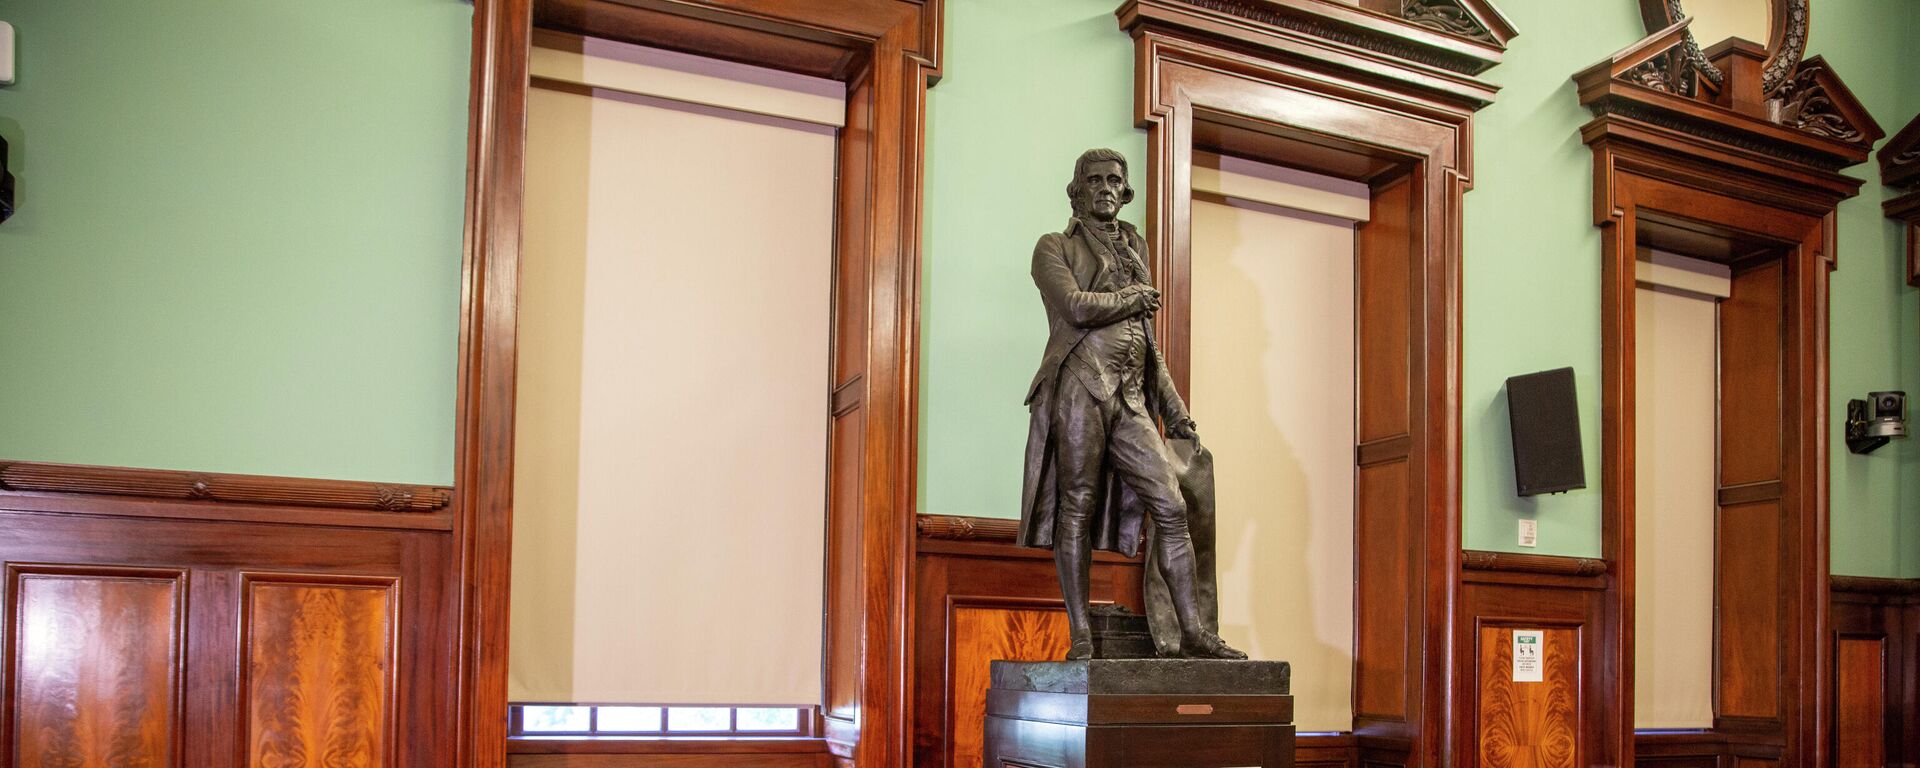 A statue of Thomas Jefferson holding the Declaration of Independence stands in New York's City Hall Council Chamber on Wednesday, October 20, 2021.  - Sputnik International, 1920, 23.11.2021